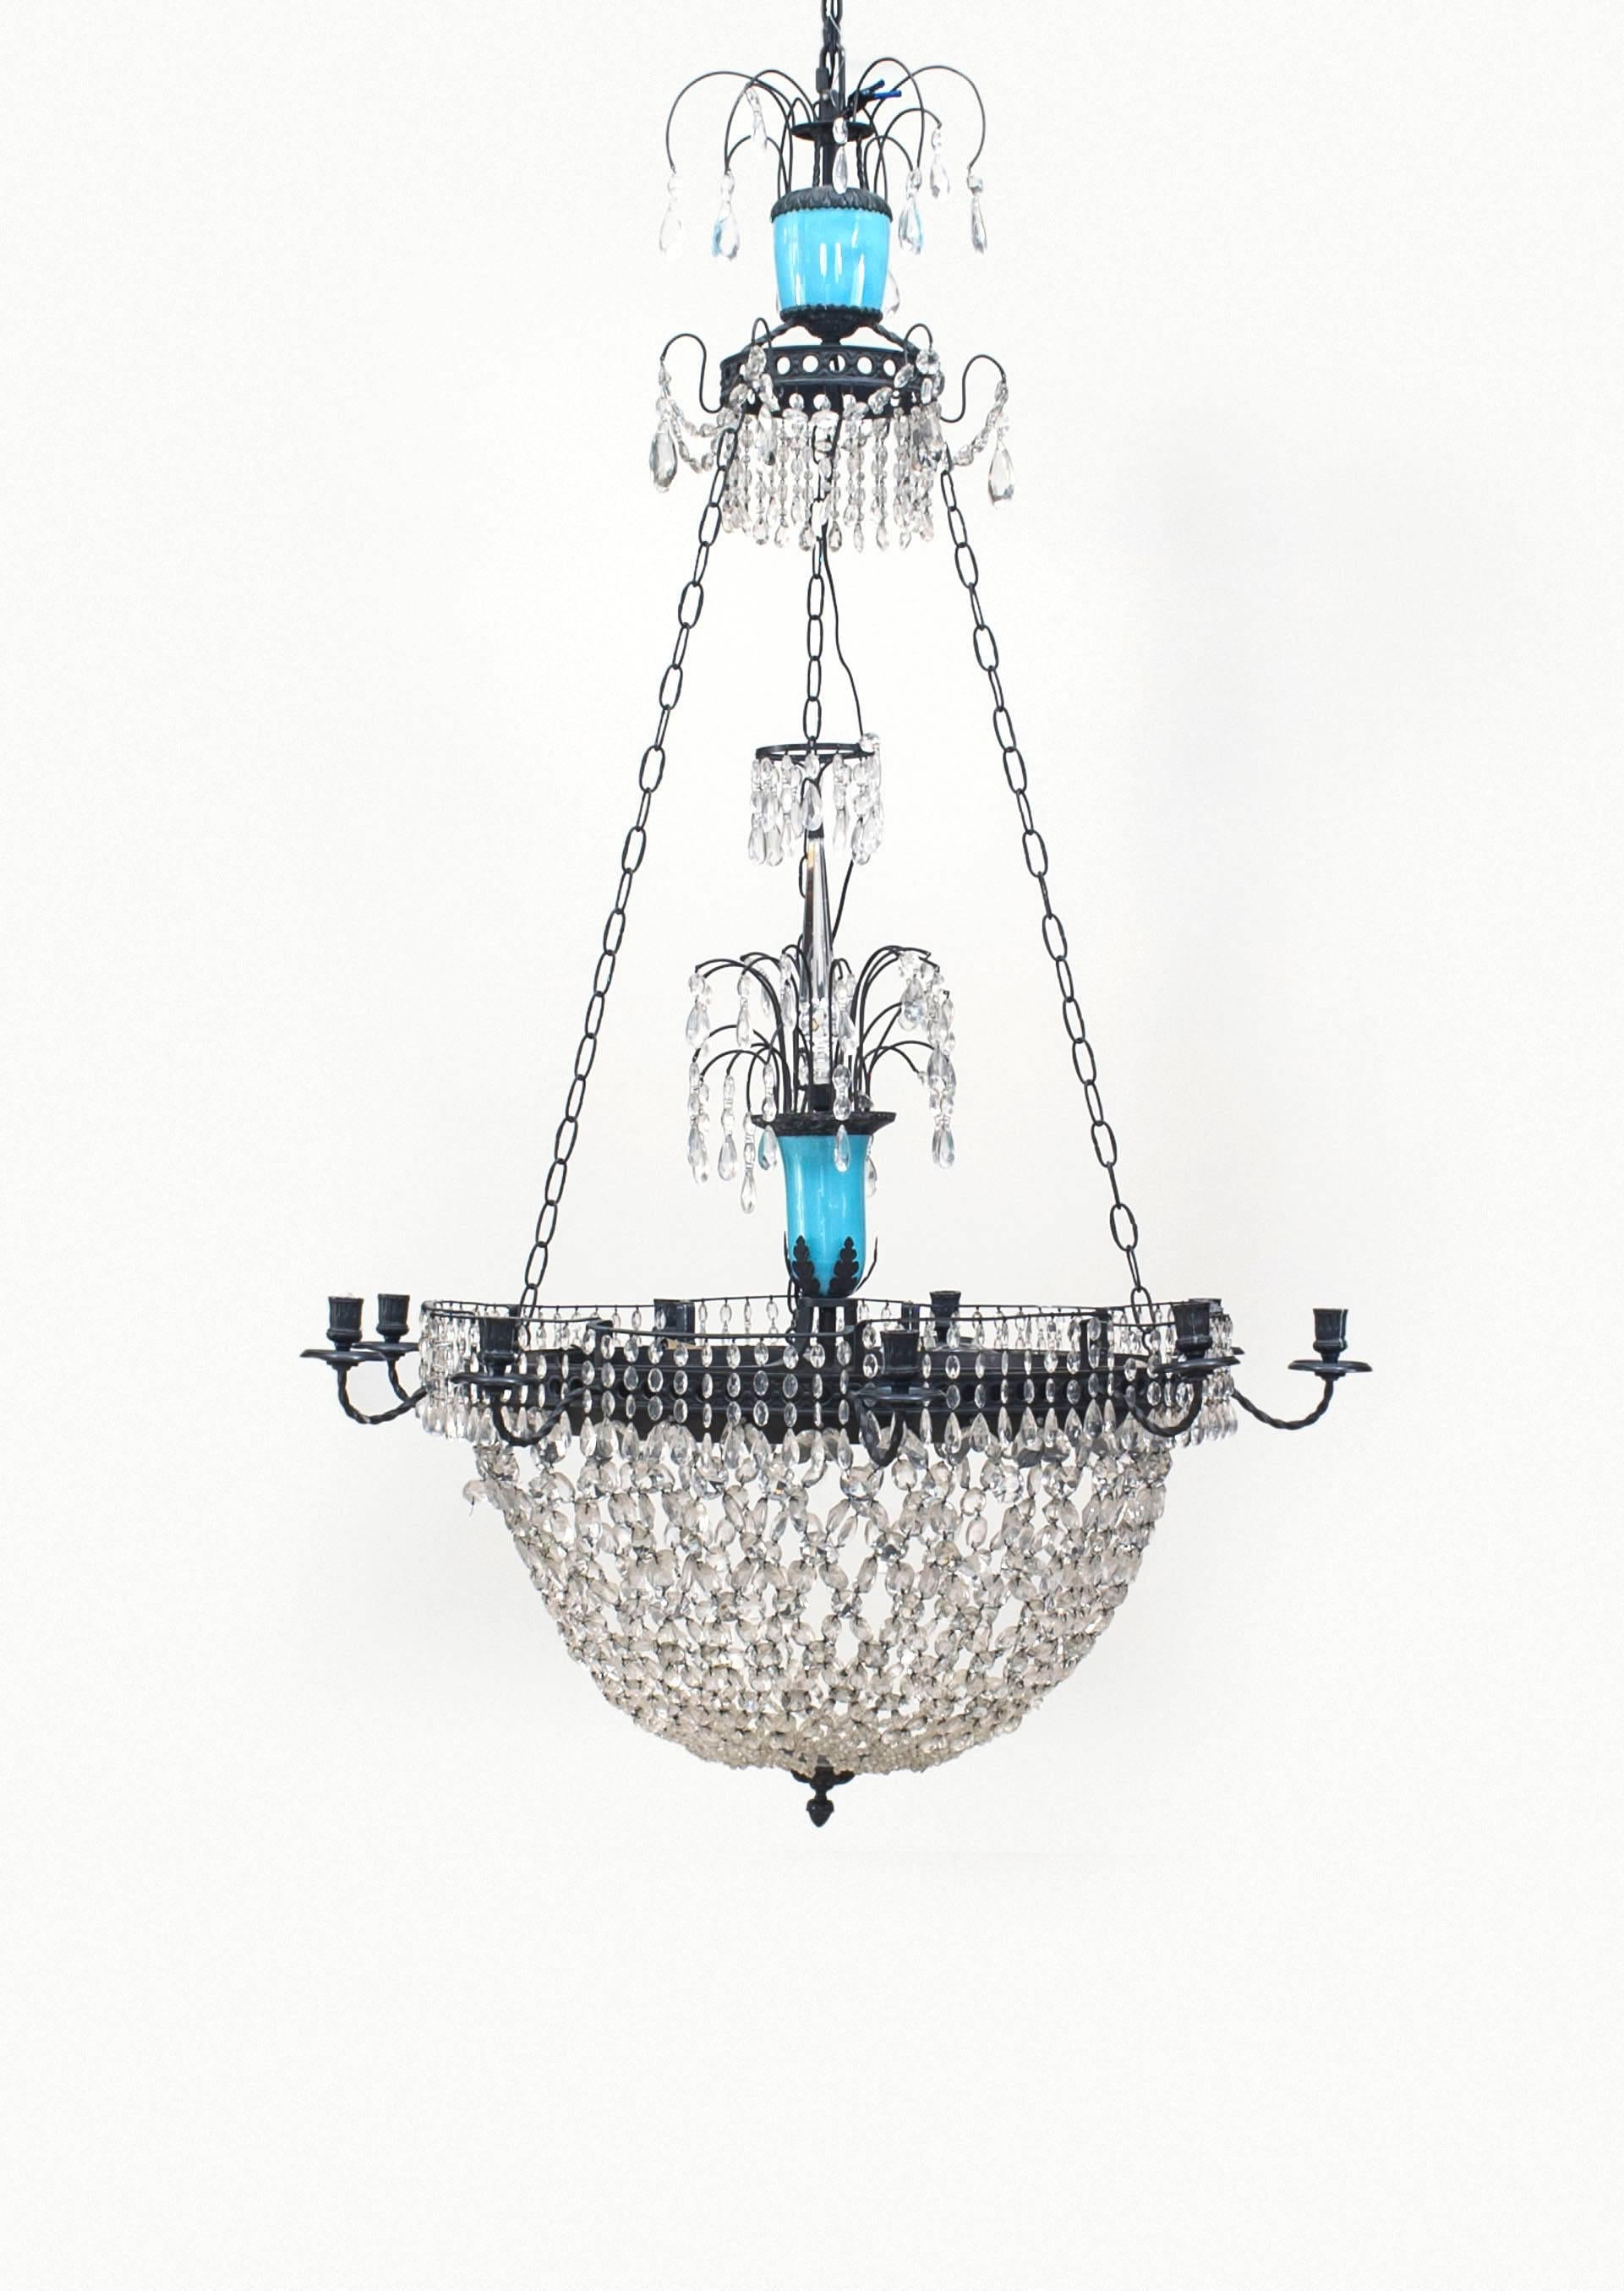 Nineteenth century French chandelier featuring a segmented opaline glass stem above a round, bowl-shaped crystal bottom rimmed with nine candleholder arms and culminating in an iron finial.